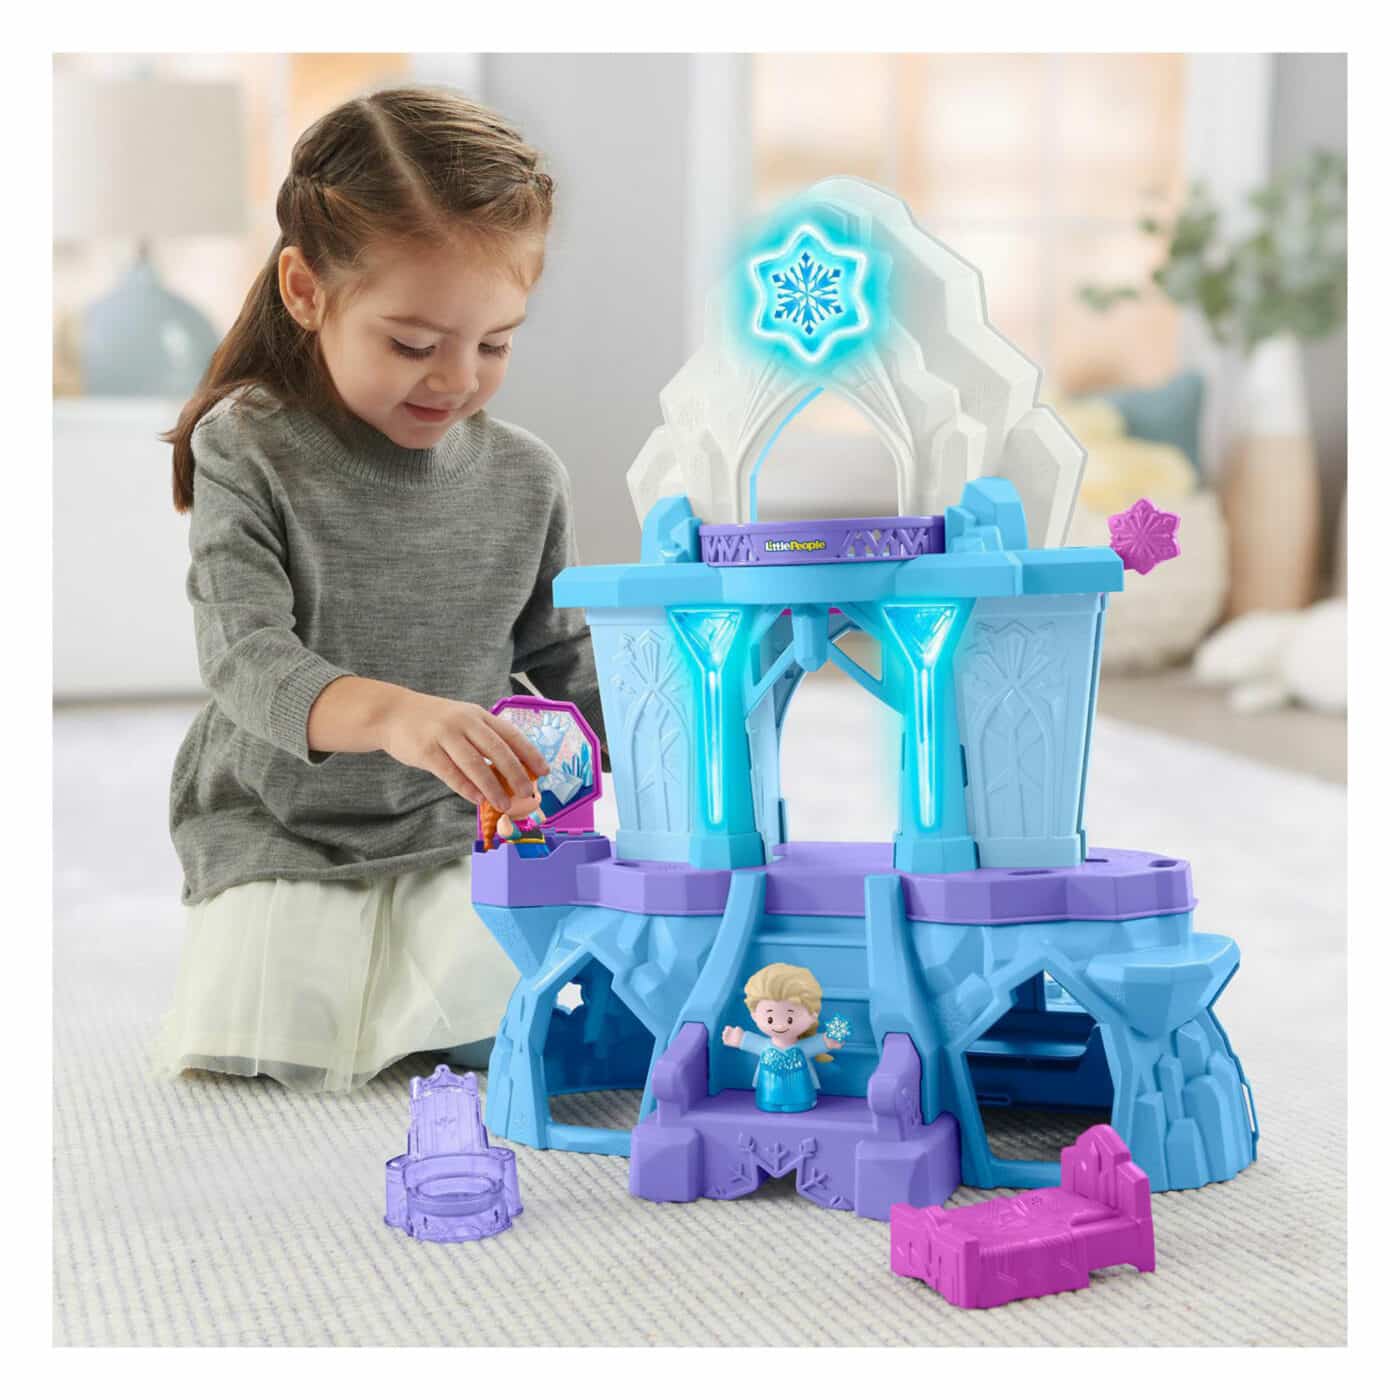 Fisher Price - Little People - Elsa's Enchanted Lights Palace